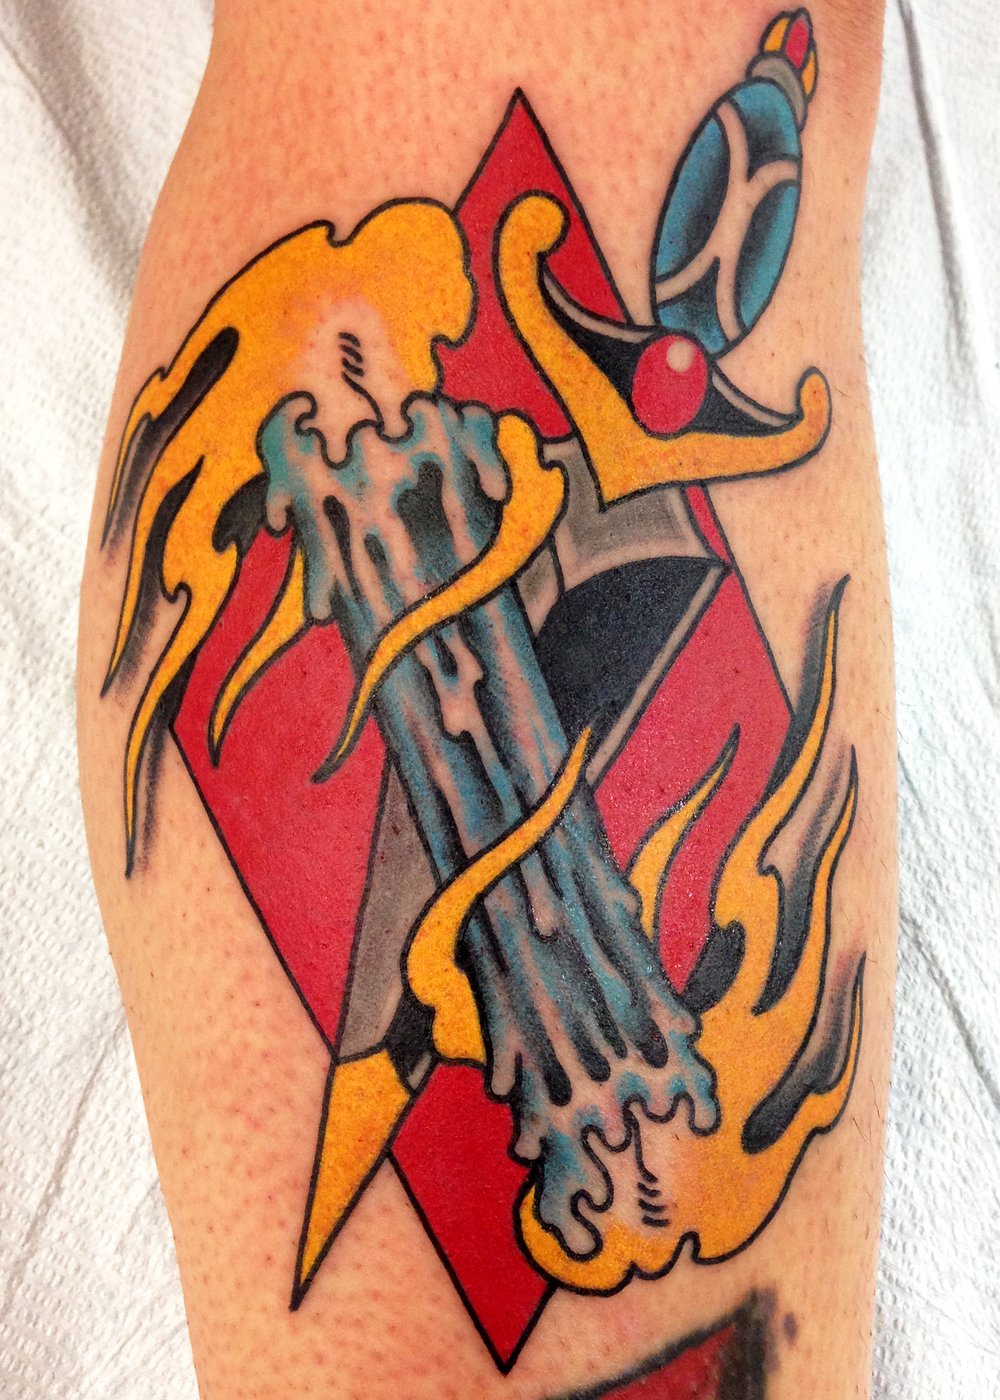 Candle burning at both ends with dagger tattoo